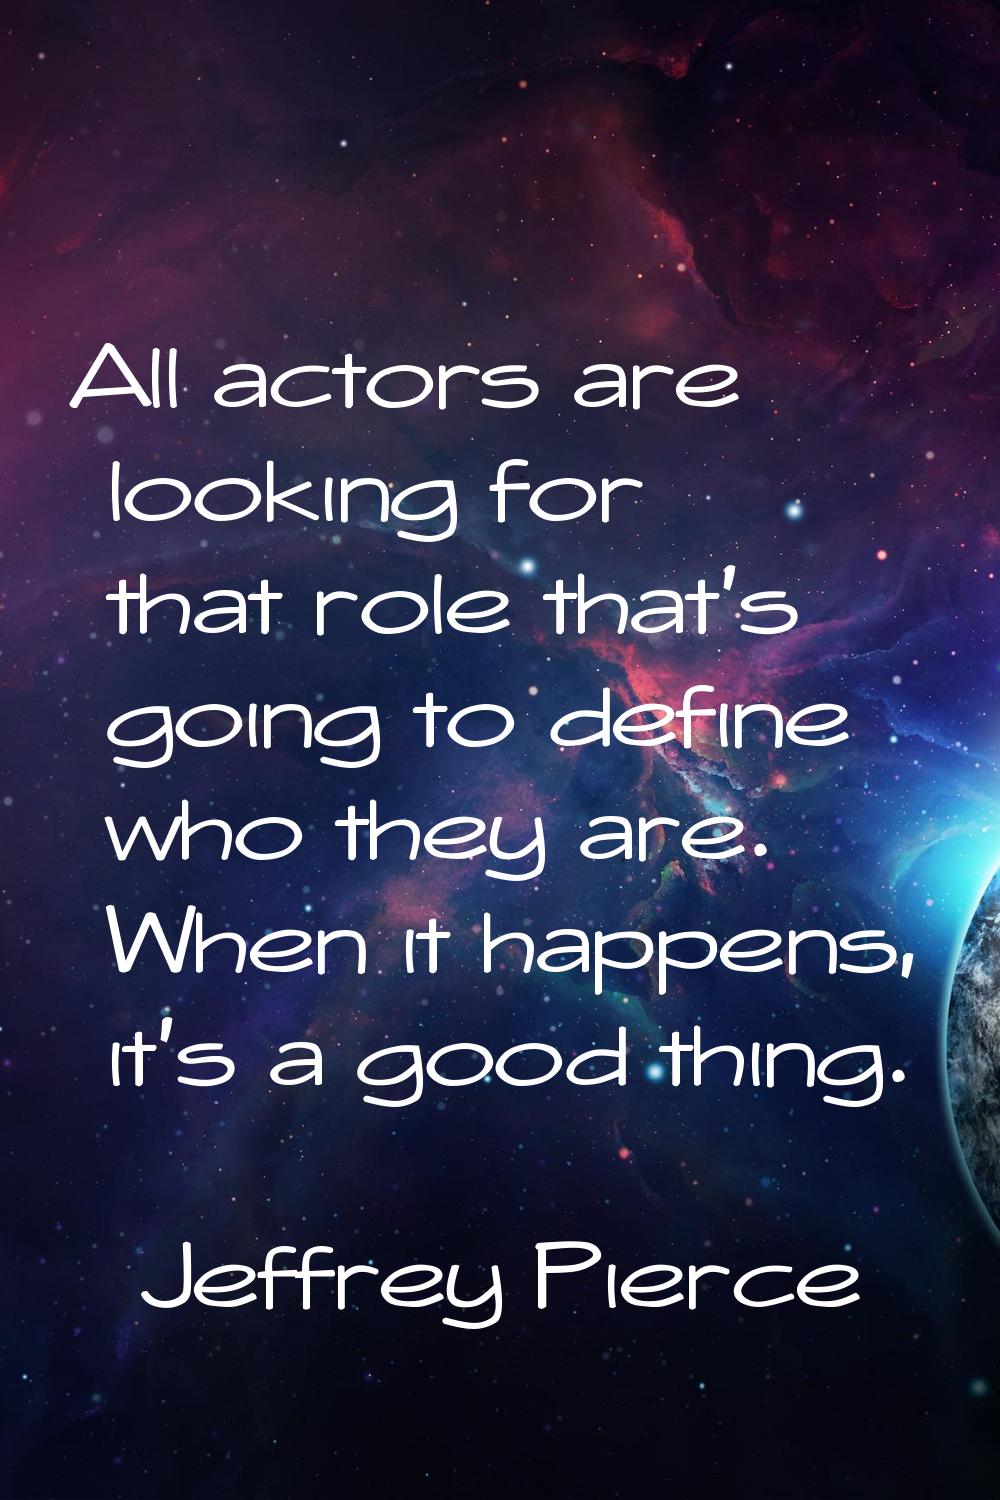 All actors are looking for that role that's going to define who they are. When it happens, it's a g